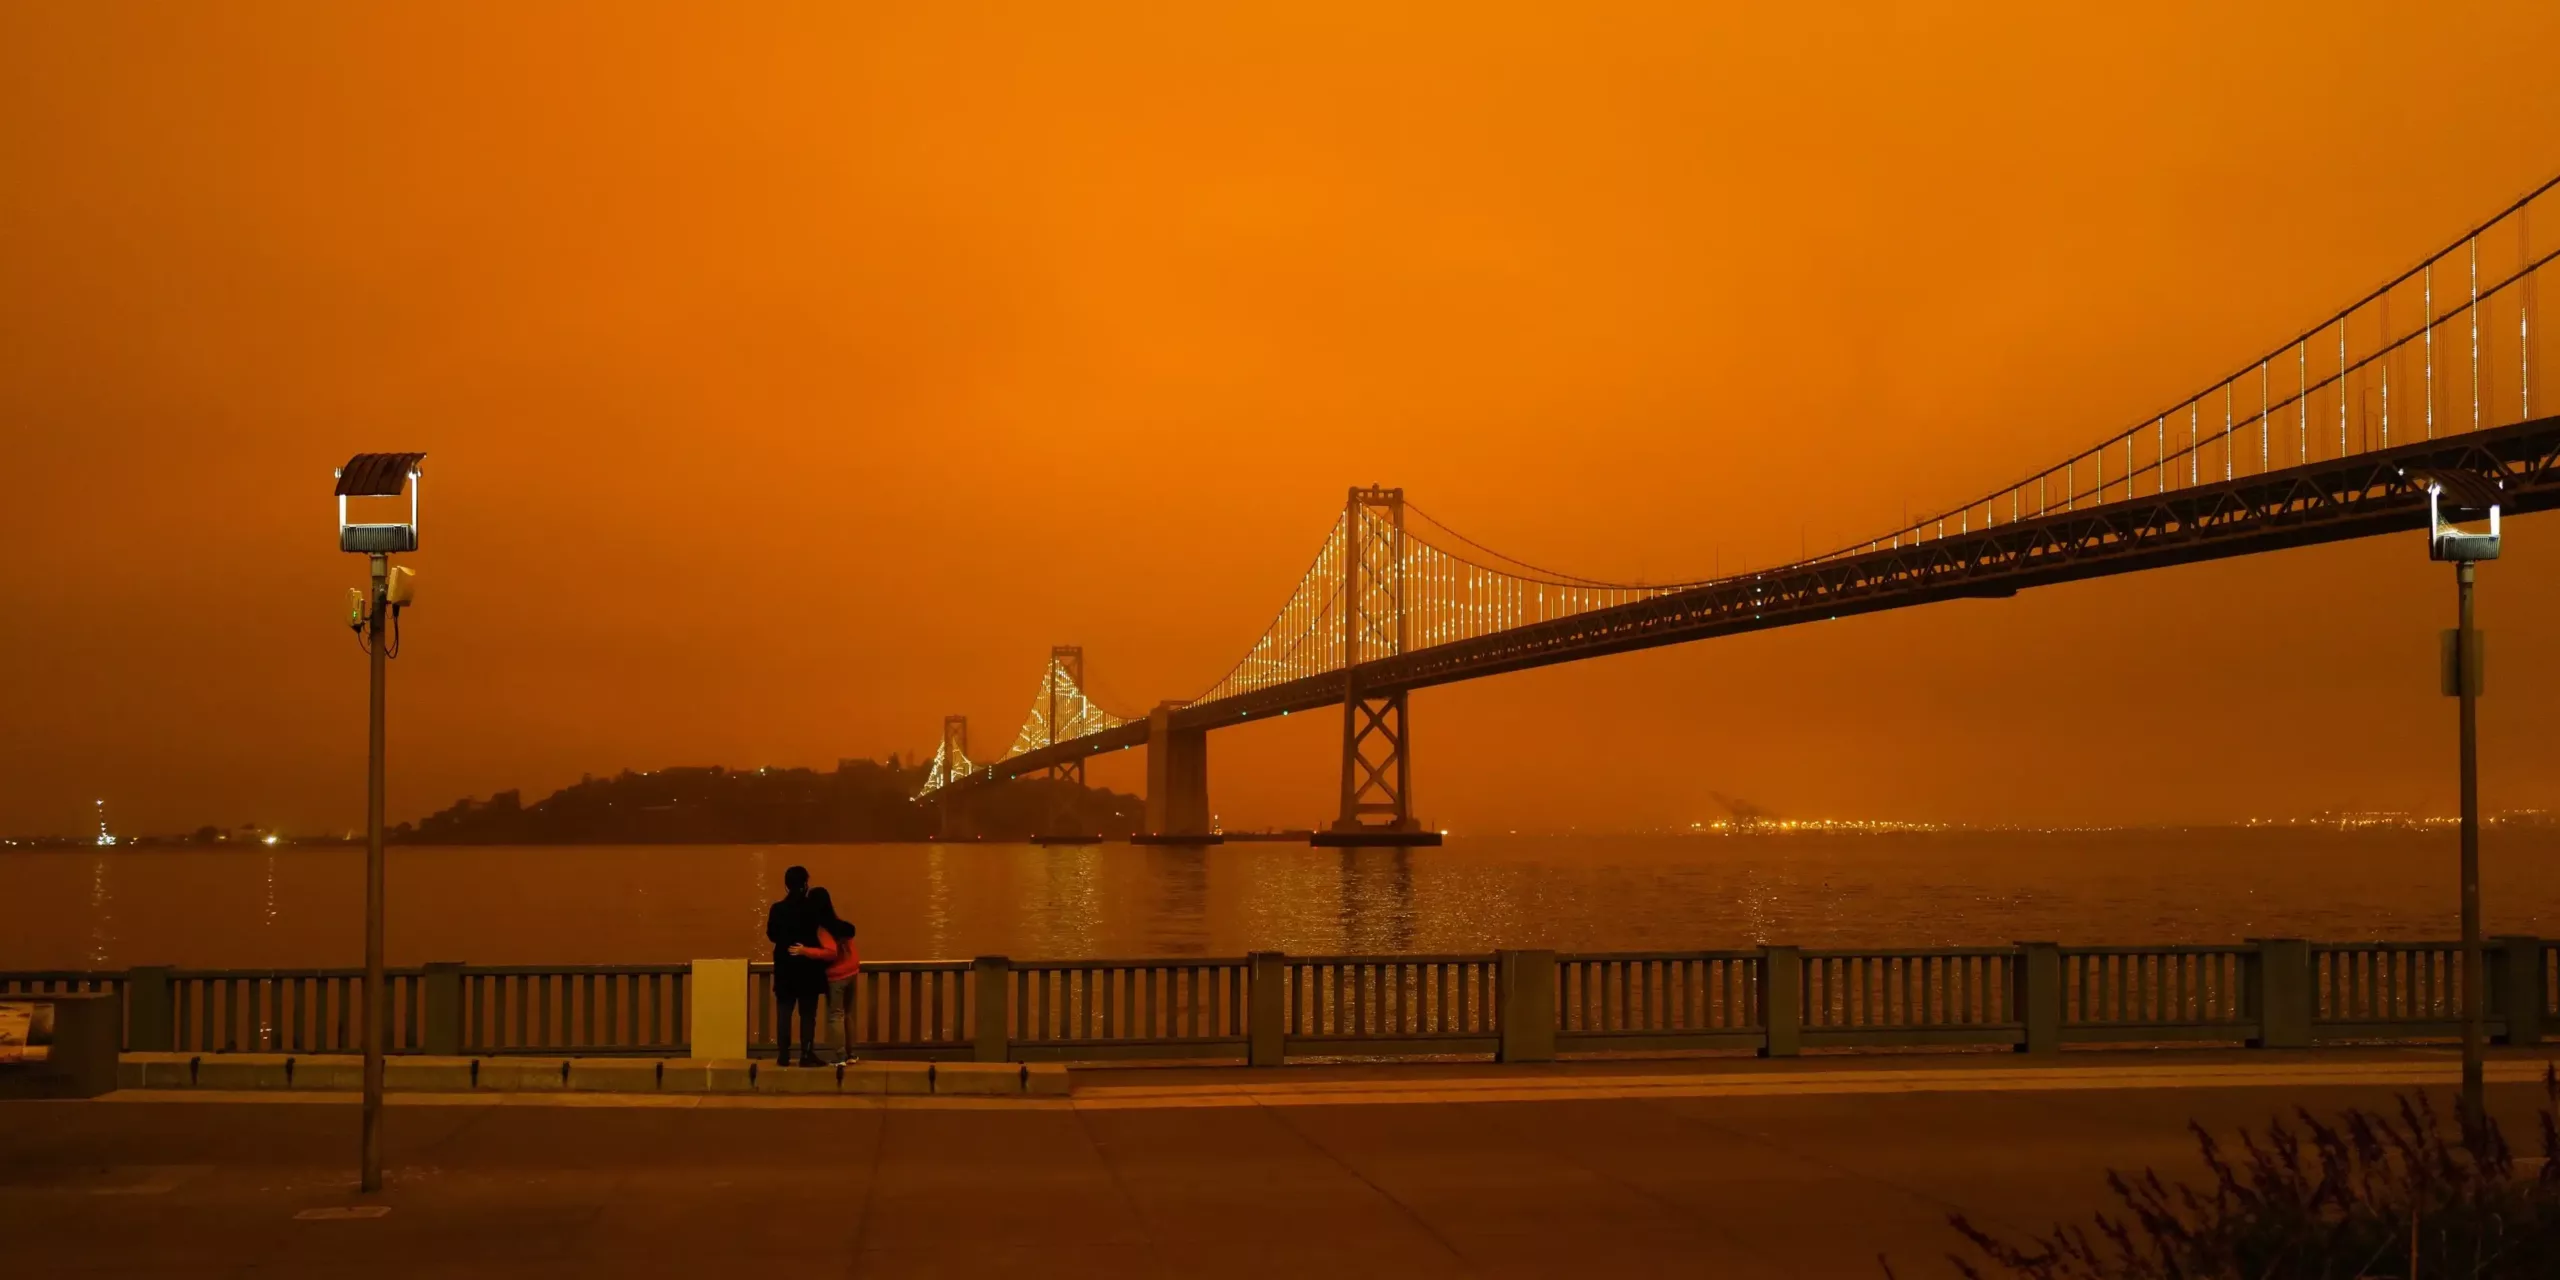 Is Climate Change Responsible for This Season’s Wildfires?